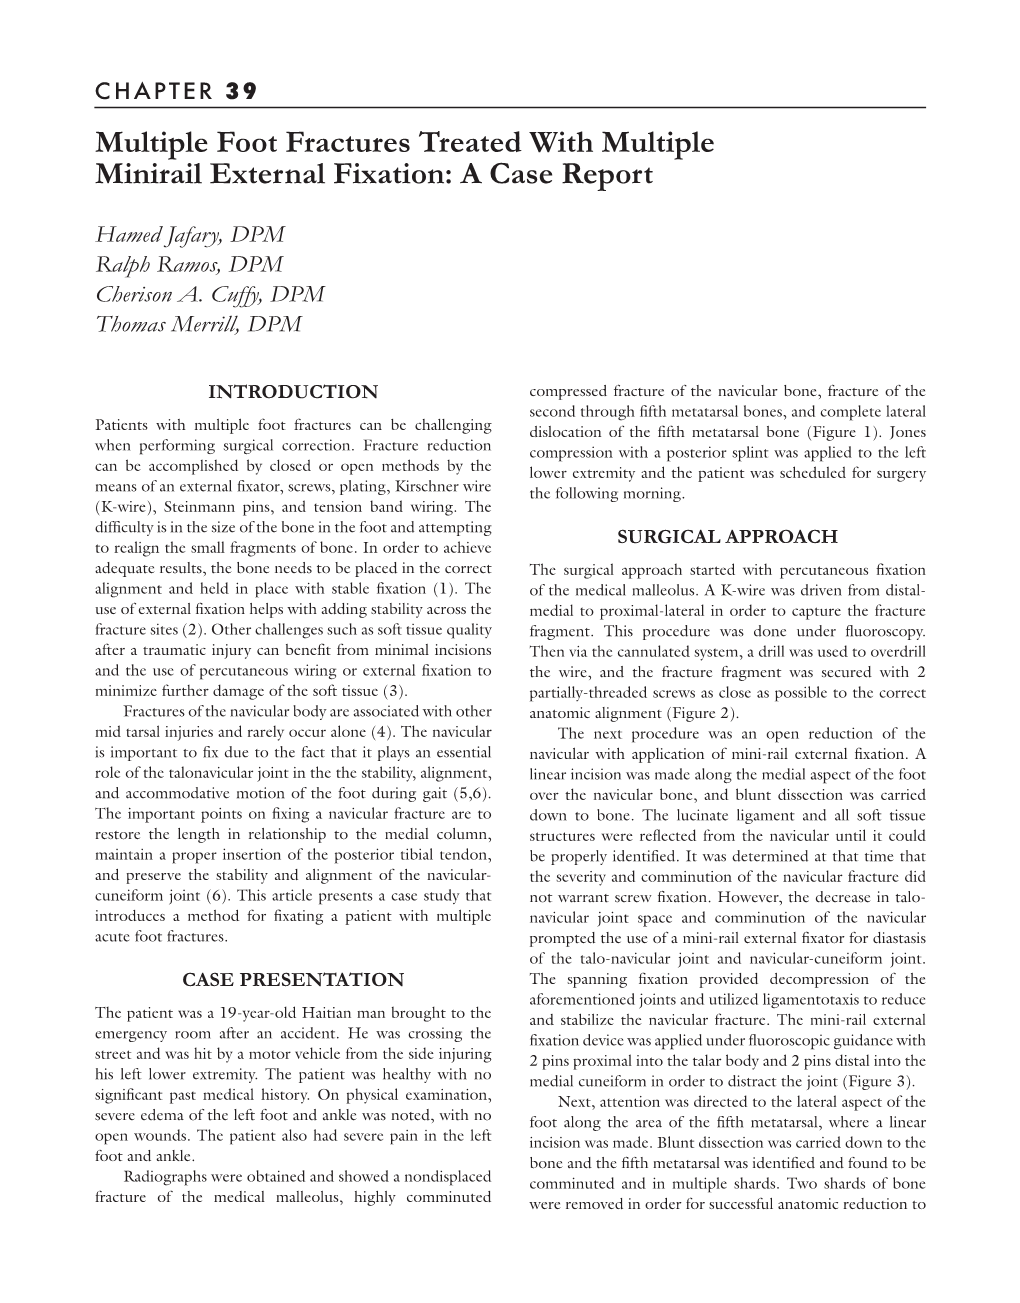 Multiple Foot Fractures Treated with Multiple Minirail External Fixation: a Case Report